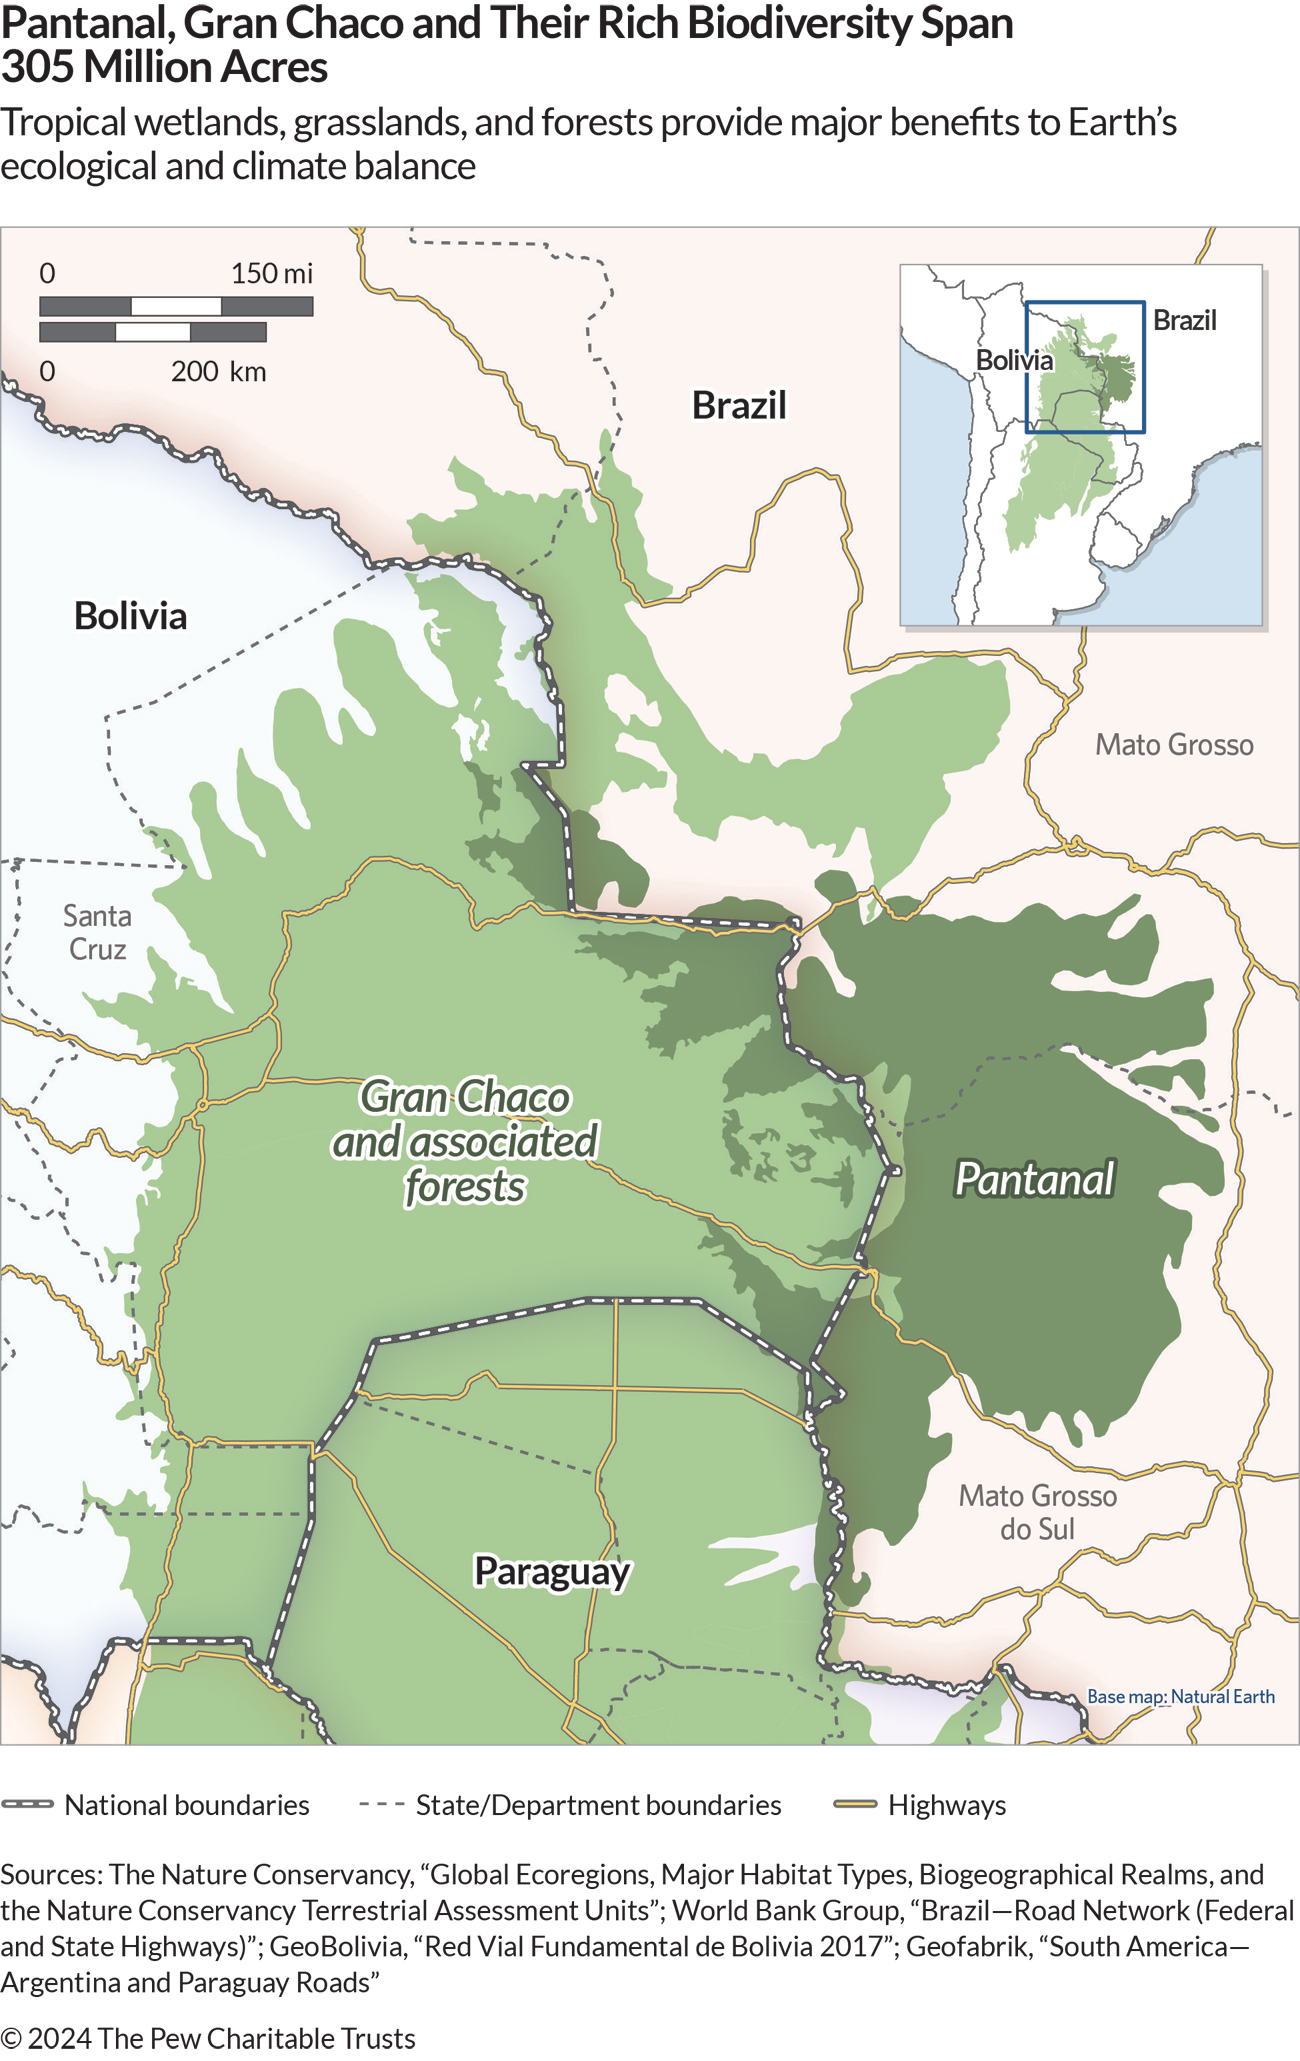 A map shows a portion of South America where Bolivia, Brazil, and Paraguay share borders. A dark green-shaded area on the right is labeled “Pantanal” and a lighter green-shaded—and larger—area is labeled “Gran Chaco and associated forests.” The map also depicts main highways and some states and departments in Brazil and Bolivia. 